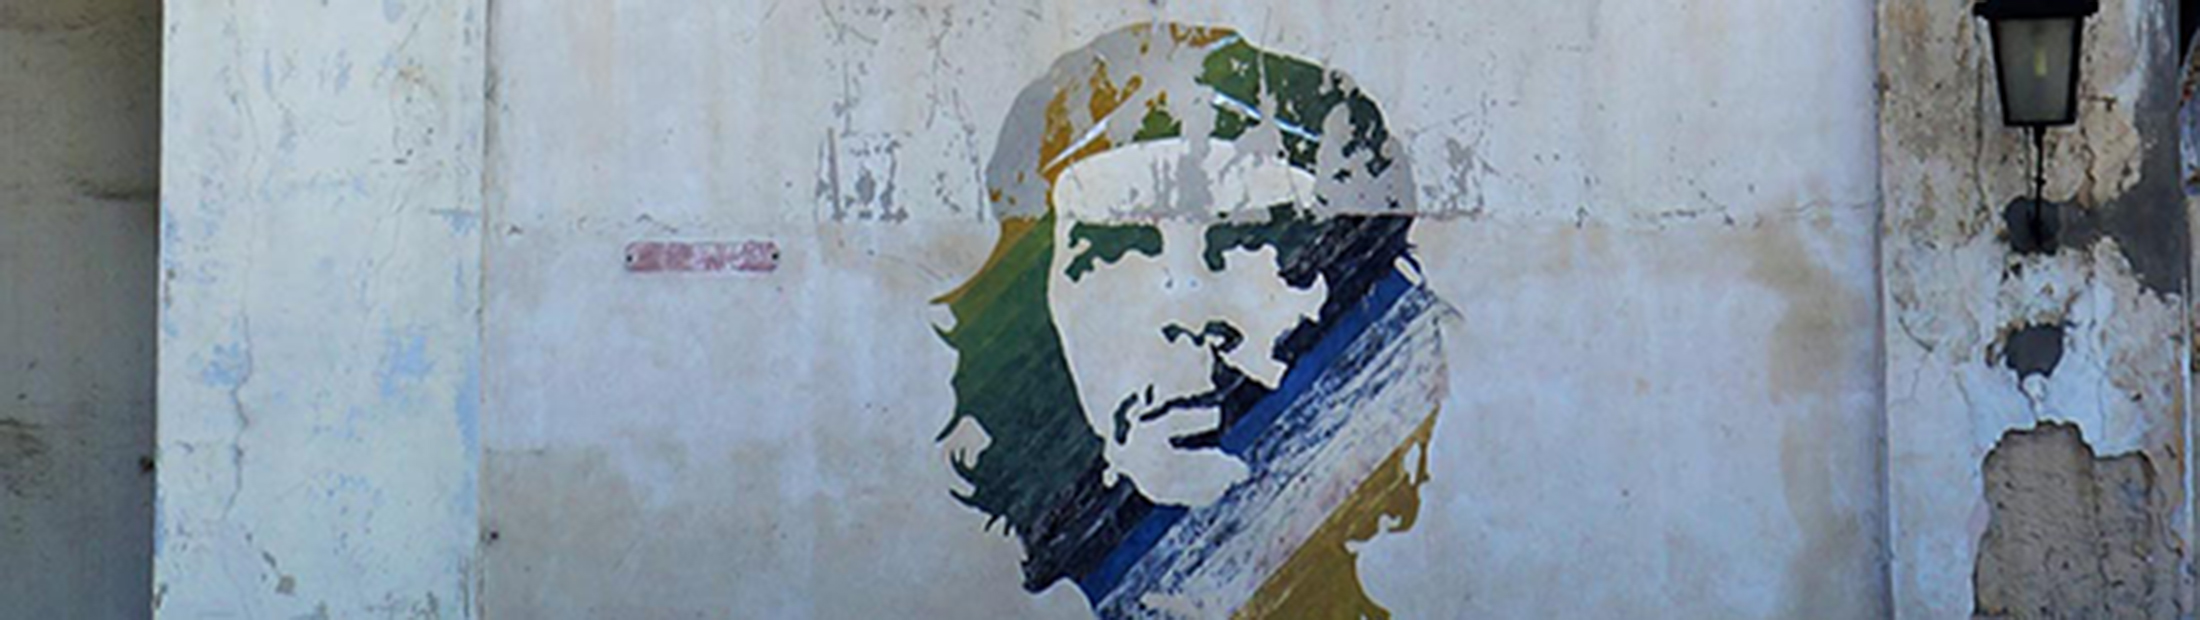 The side of an old building with Che Guevara's face pained on it.